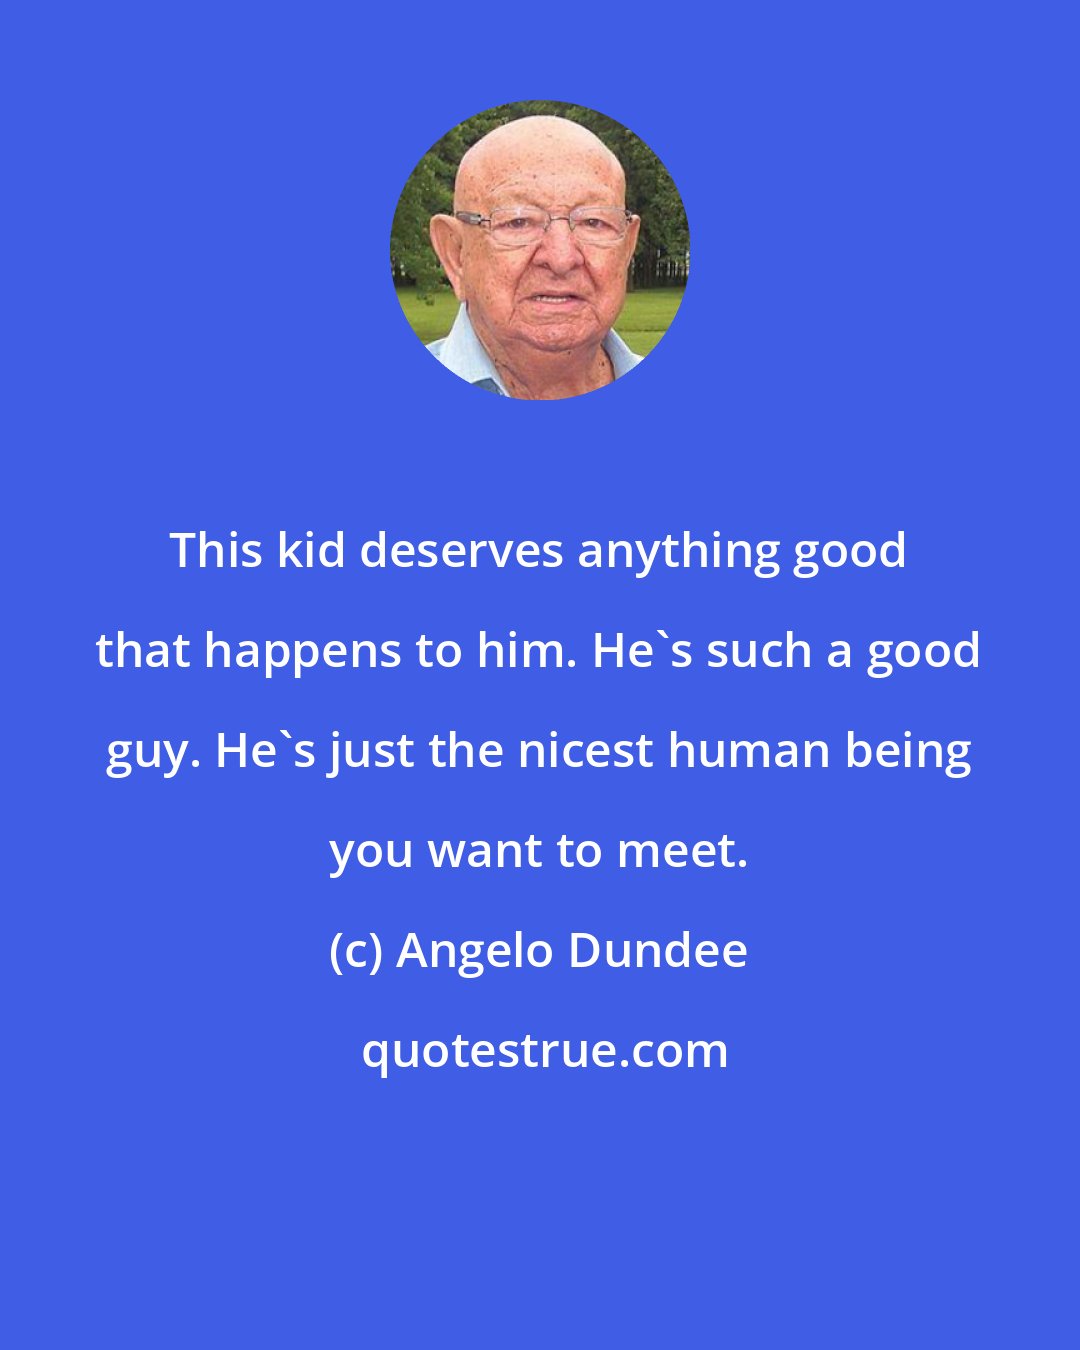 Angelo Dundee: This kid deserves anything good that happens to him. He's such a good guy. He's just the nicest human being you want to meet.